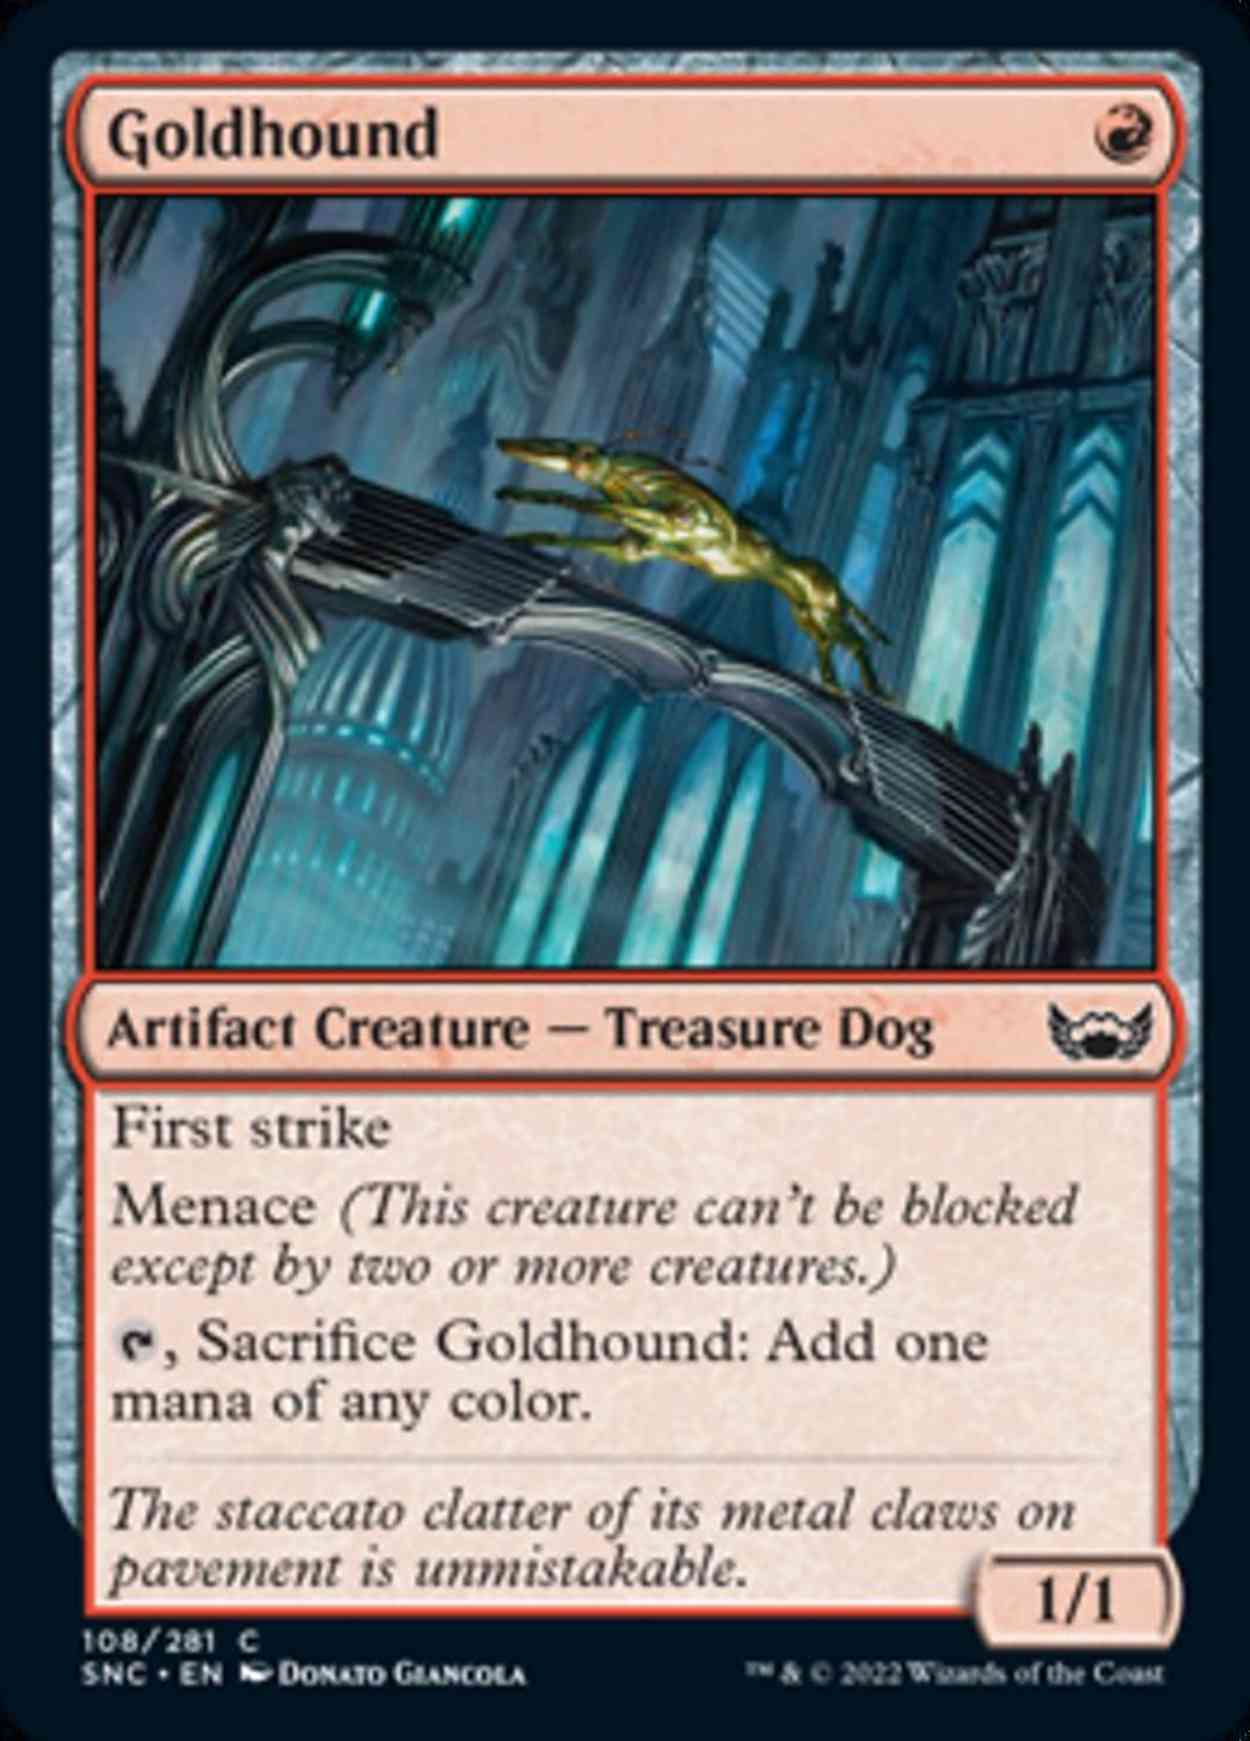 Goldhound magic card front